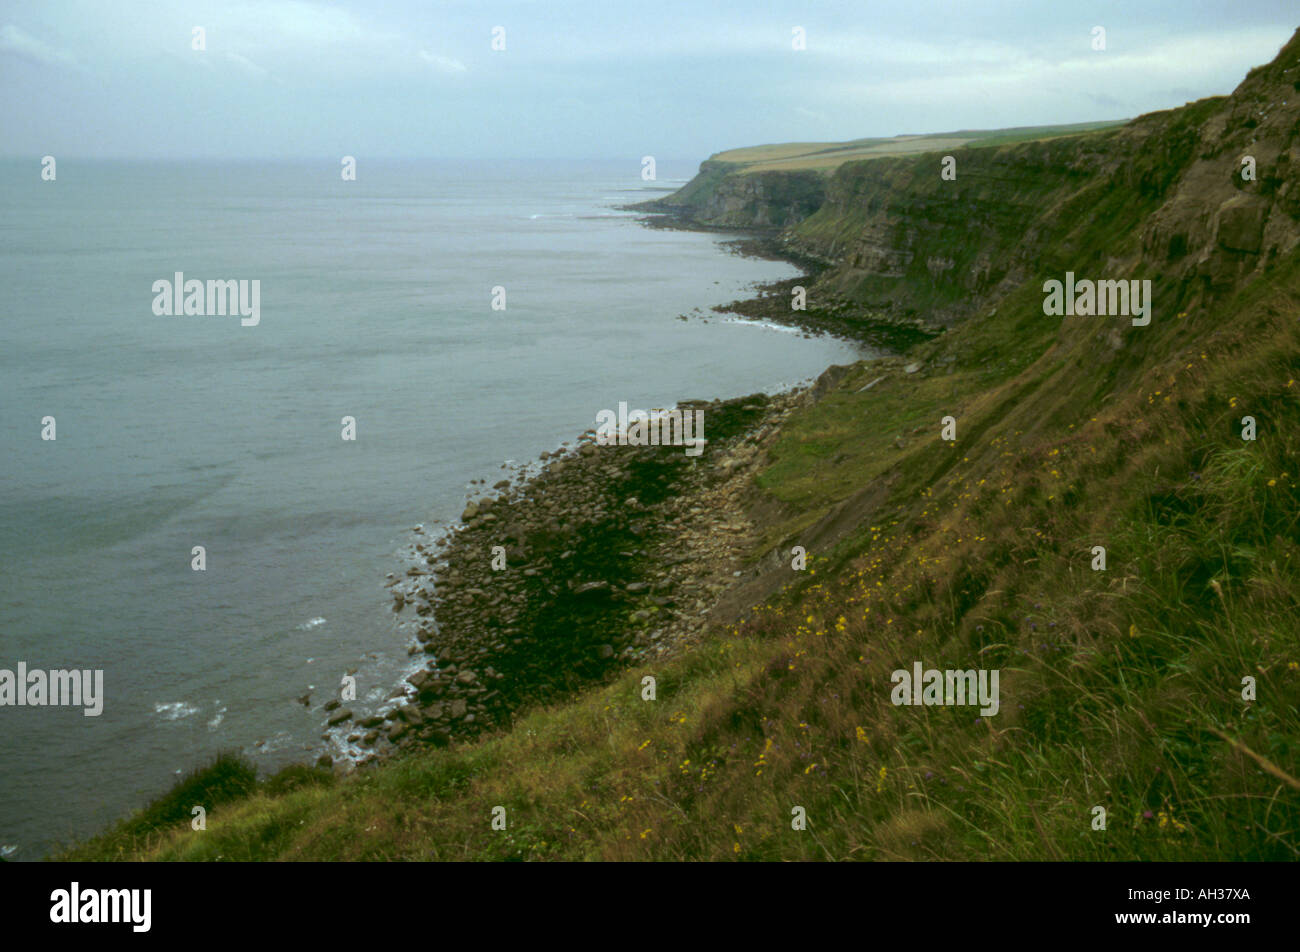 View south of sea cliffs between Whitby and Robin Hoods Bay, North York Moors coast, North Yorkshire, England, UK Stock Photo